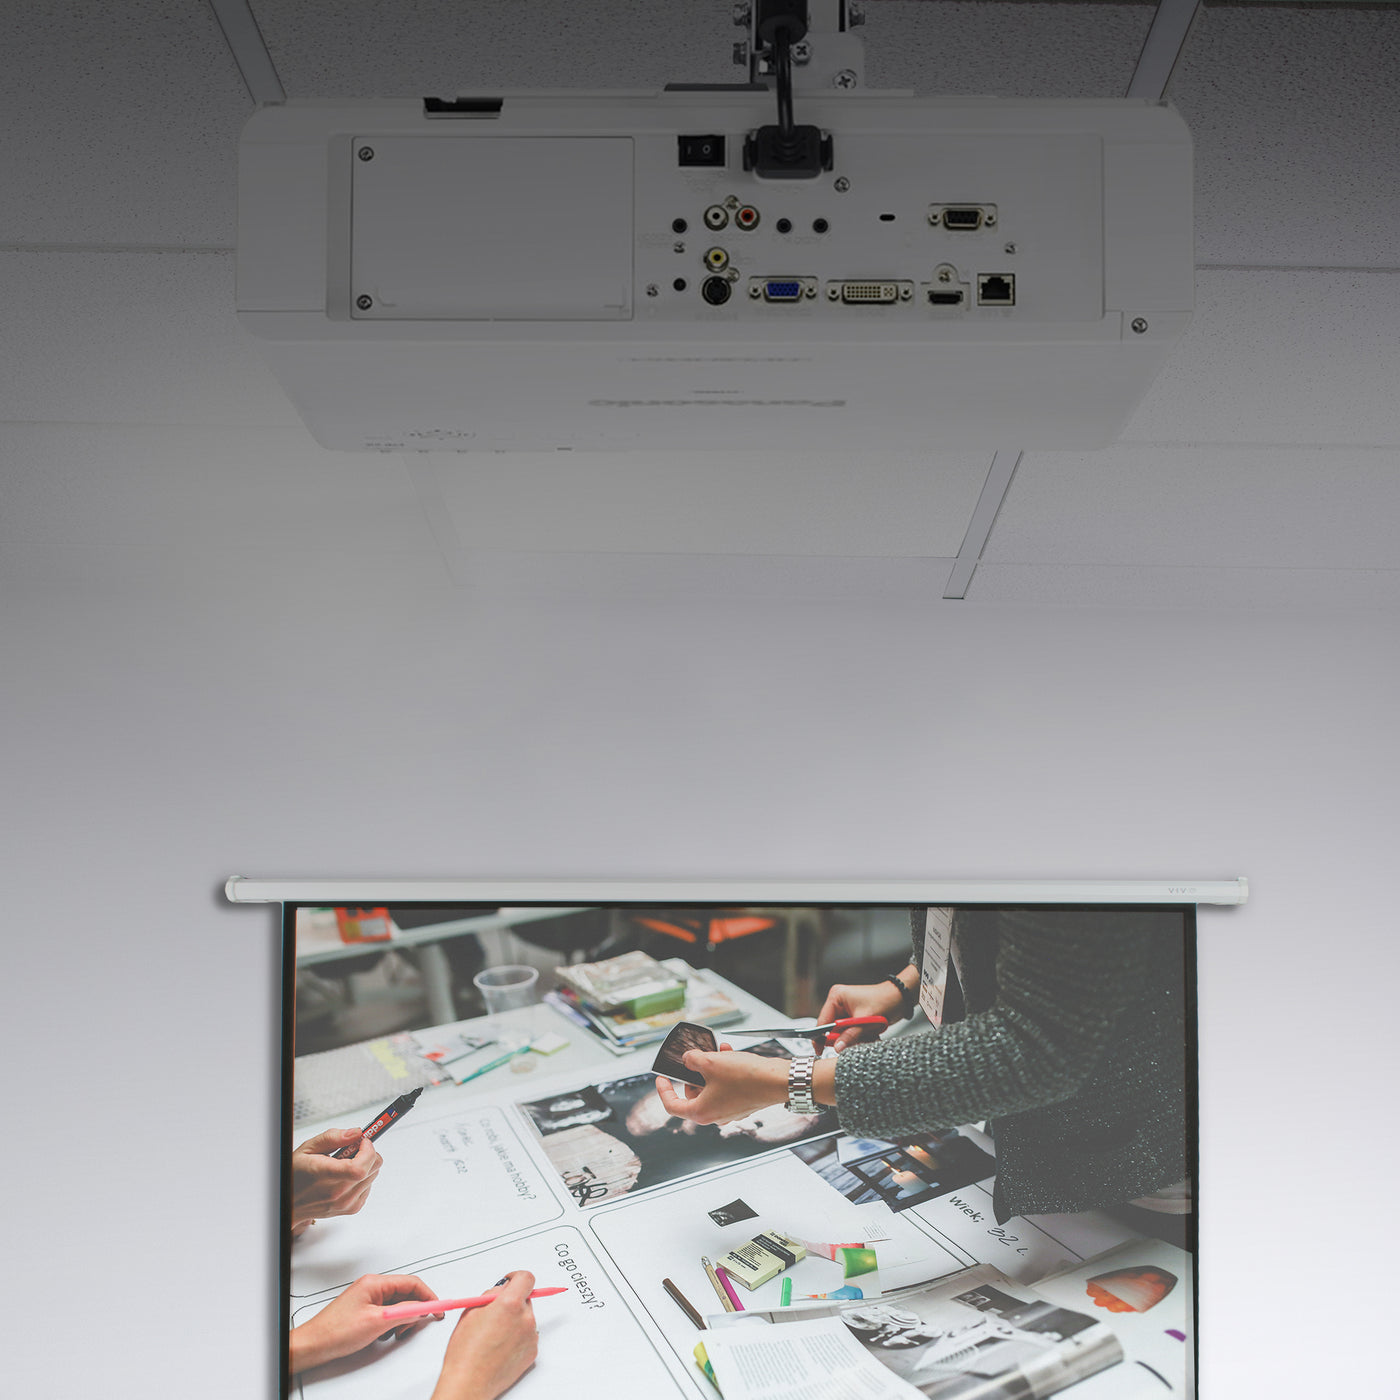 Subtel ceiling panel projector mount projecting an image onto a screen.